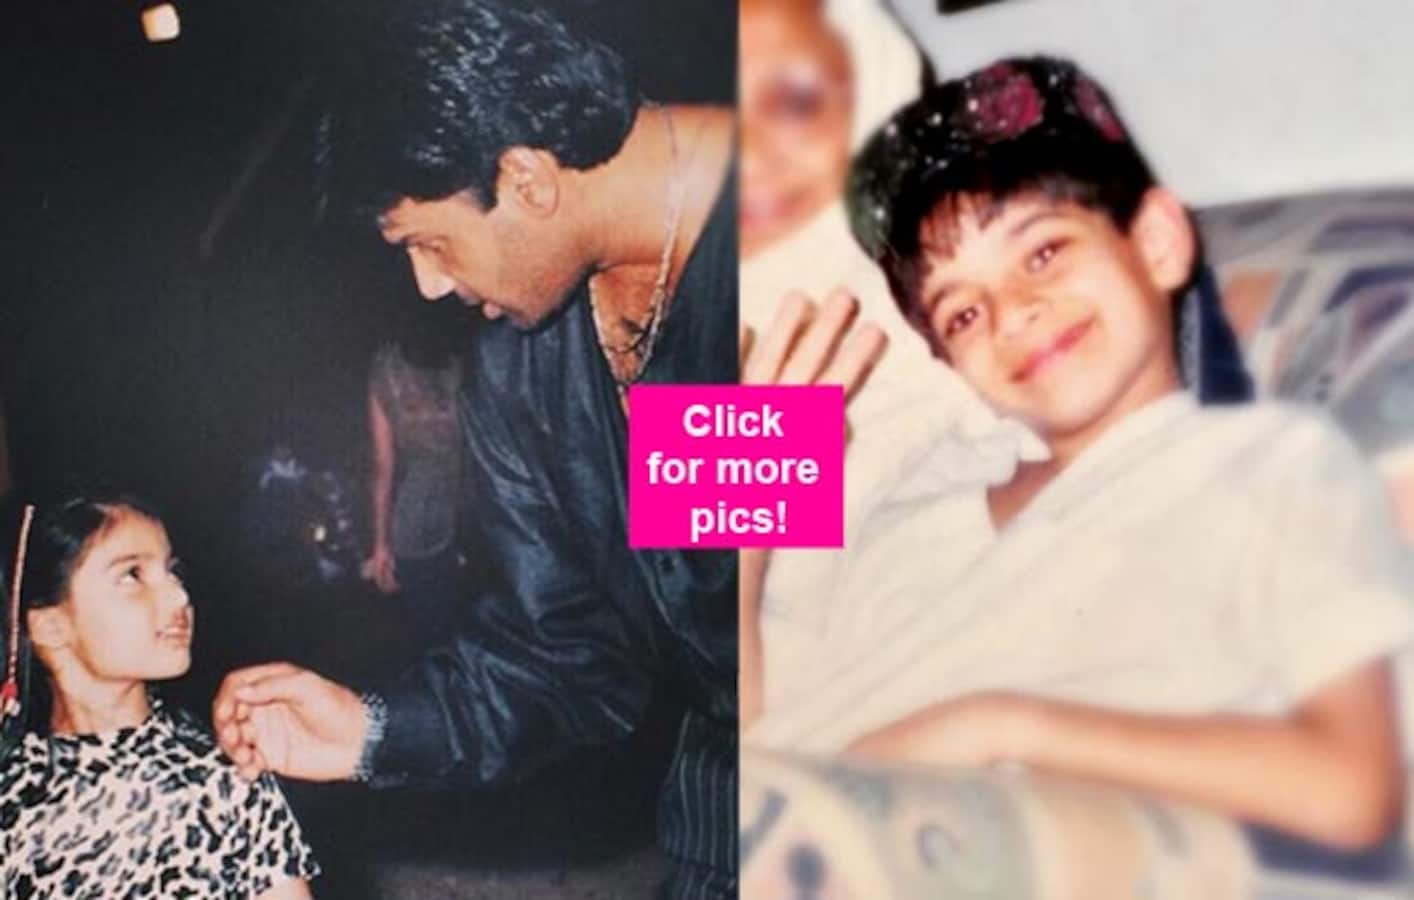 Sooraj Pancholi and Athiya Shetty's childhood pictures will remind you of your carefree days!